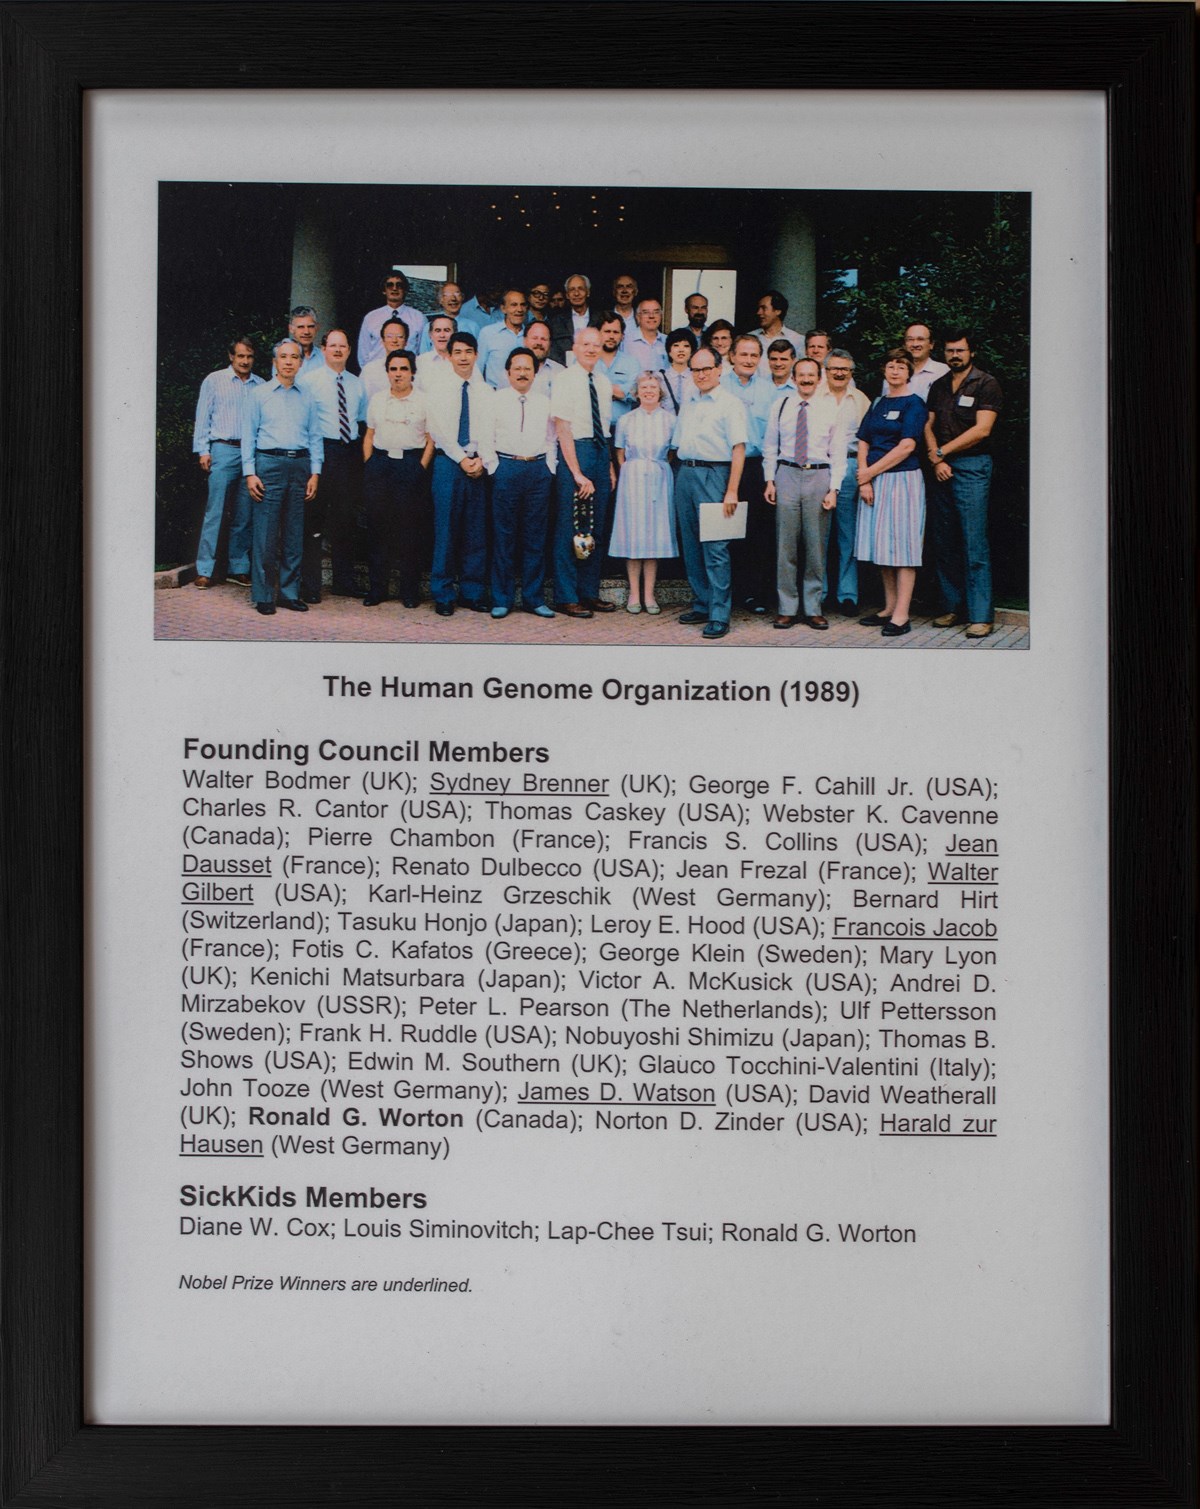 A framed group photo of the Human Genome Organization in 1989. Under the photo, there is a list of founding council members and SickKids members.